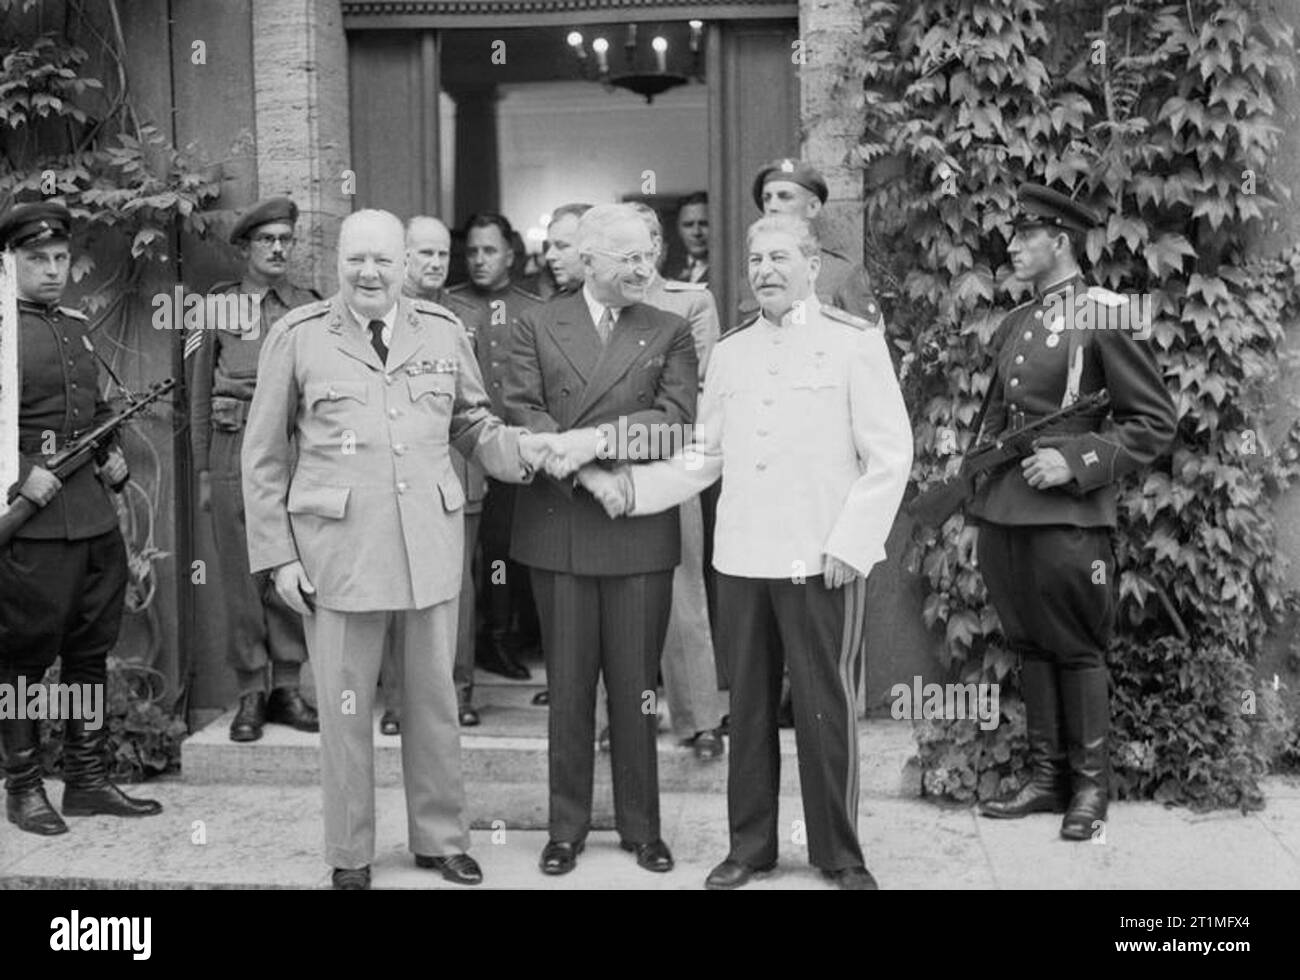 The Potsdam Conference, July 1945 Prime Minister Churchill, President Truman and Marshal Stalin shake hands after the conference. Code-named TERMINAL this was the final Big Three meeting of the war. Stock Photo